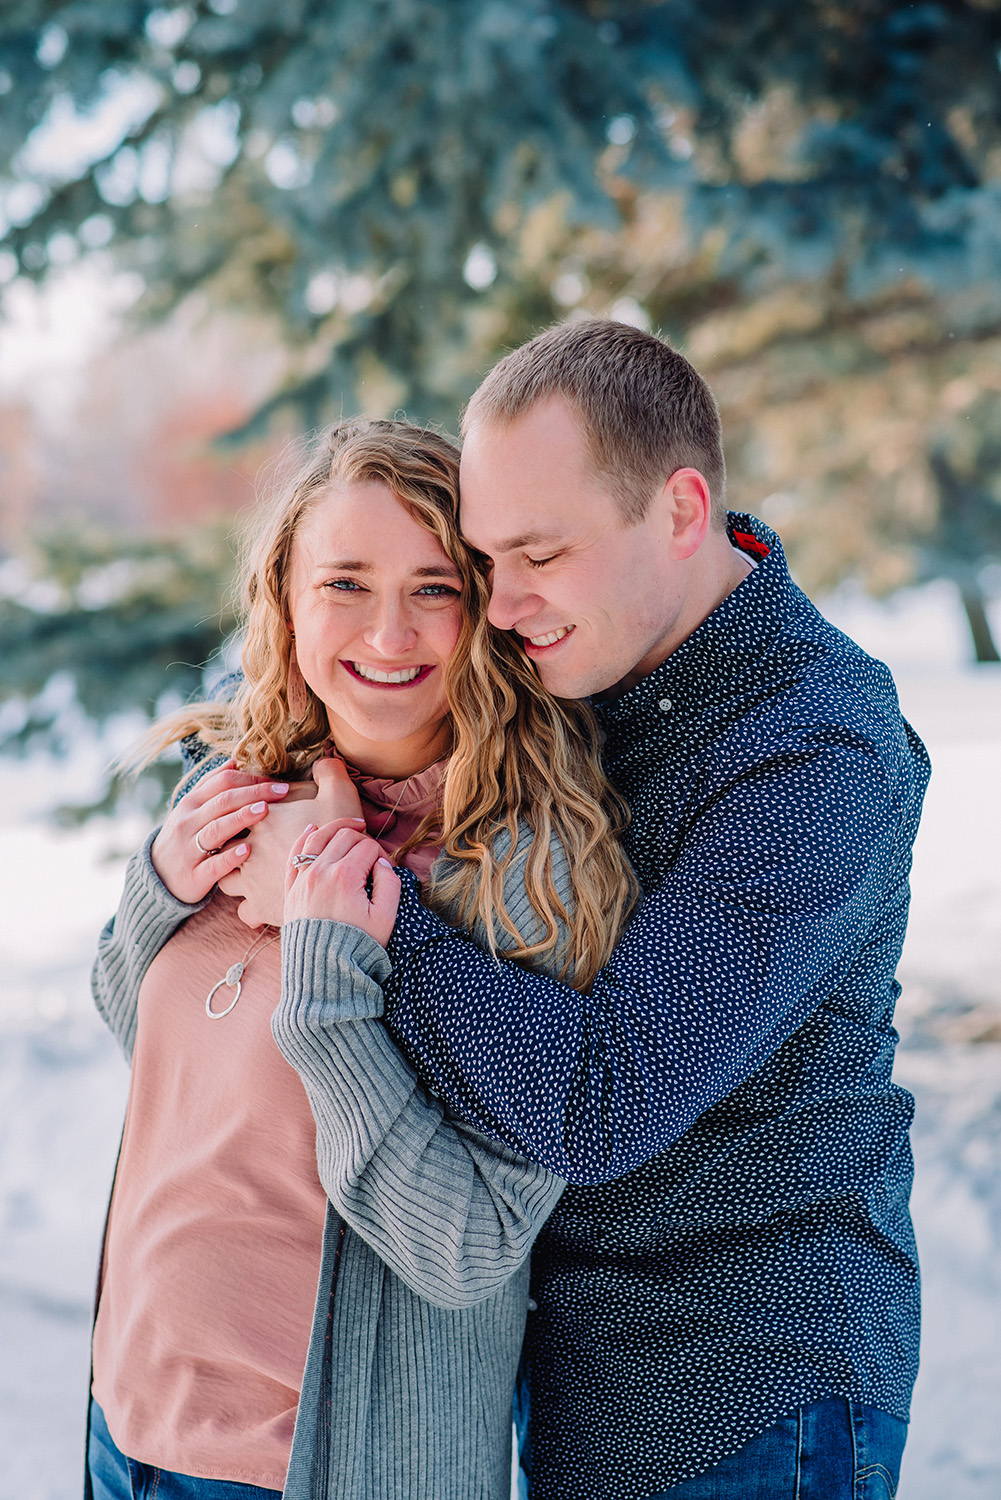 janelle and co photography engaged couple walking and laughing in the snow winter photos wedding photographer idaho falls freeman park engagement photos in the pine trees forest romantic and traditional